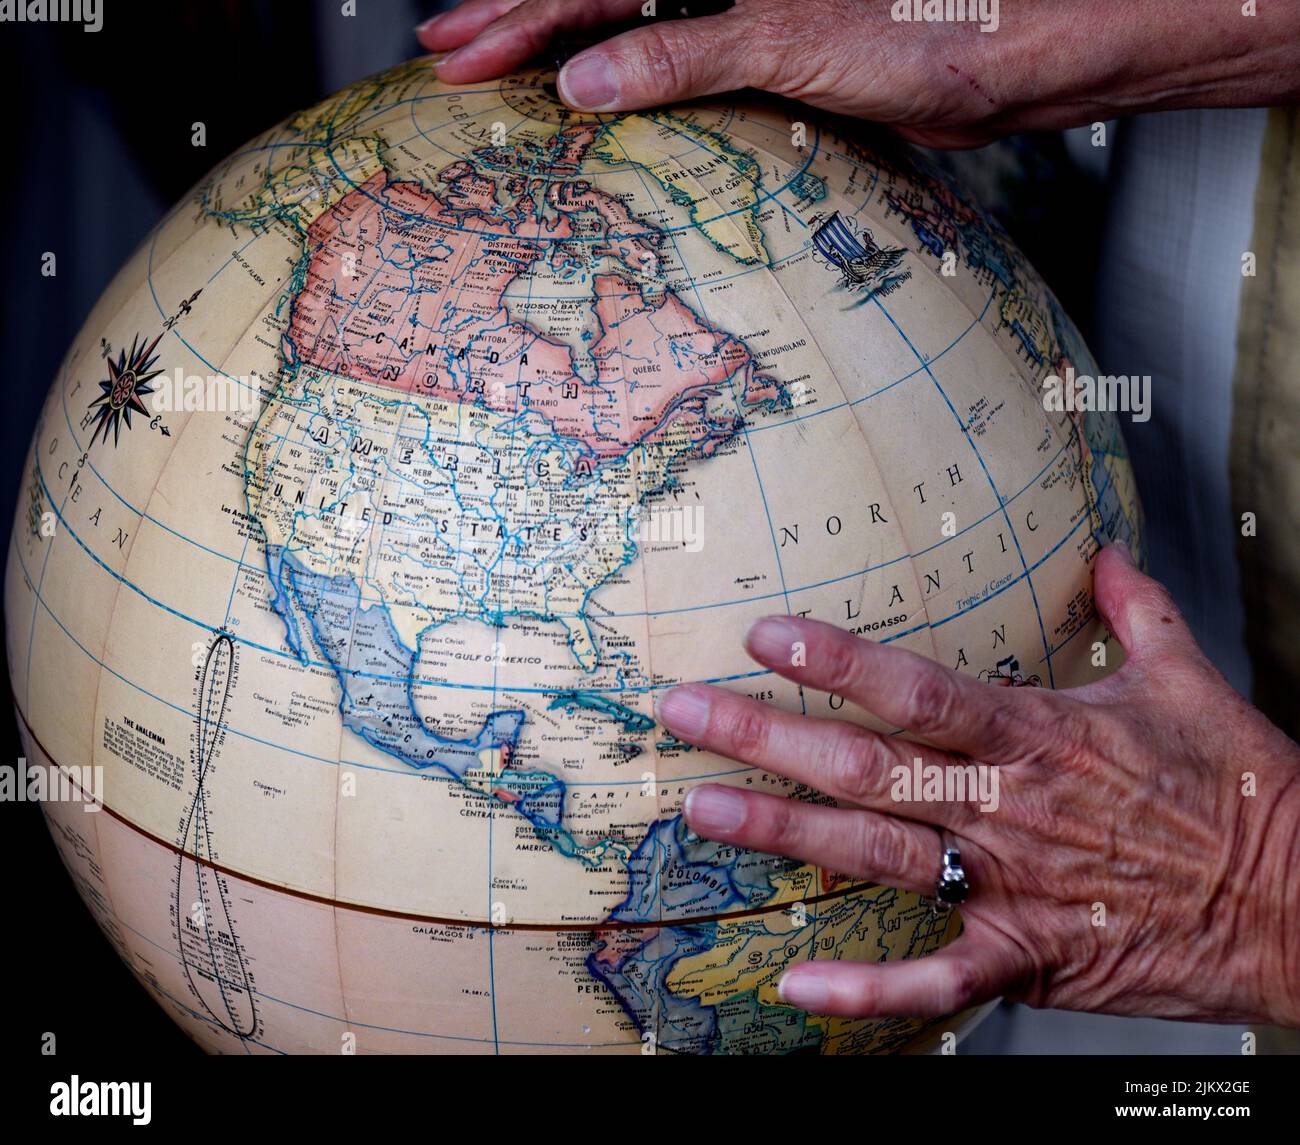 A woman examines the North American continent and other geographial locations on a globe for sale in an antique shop. Stock Photo